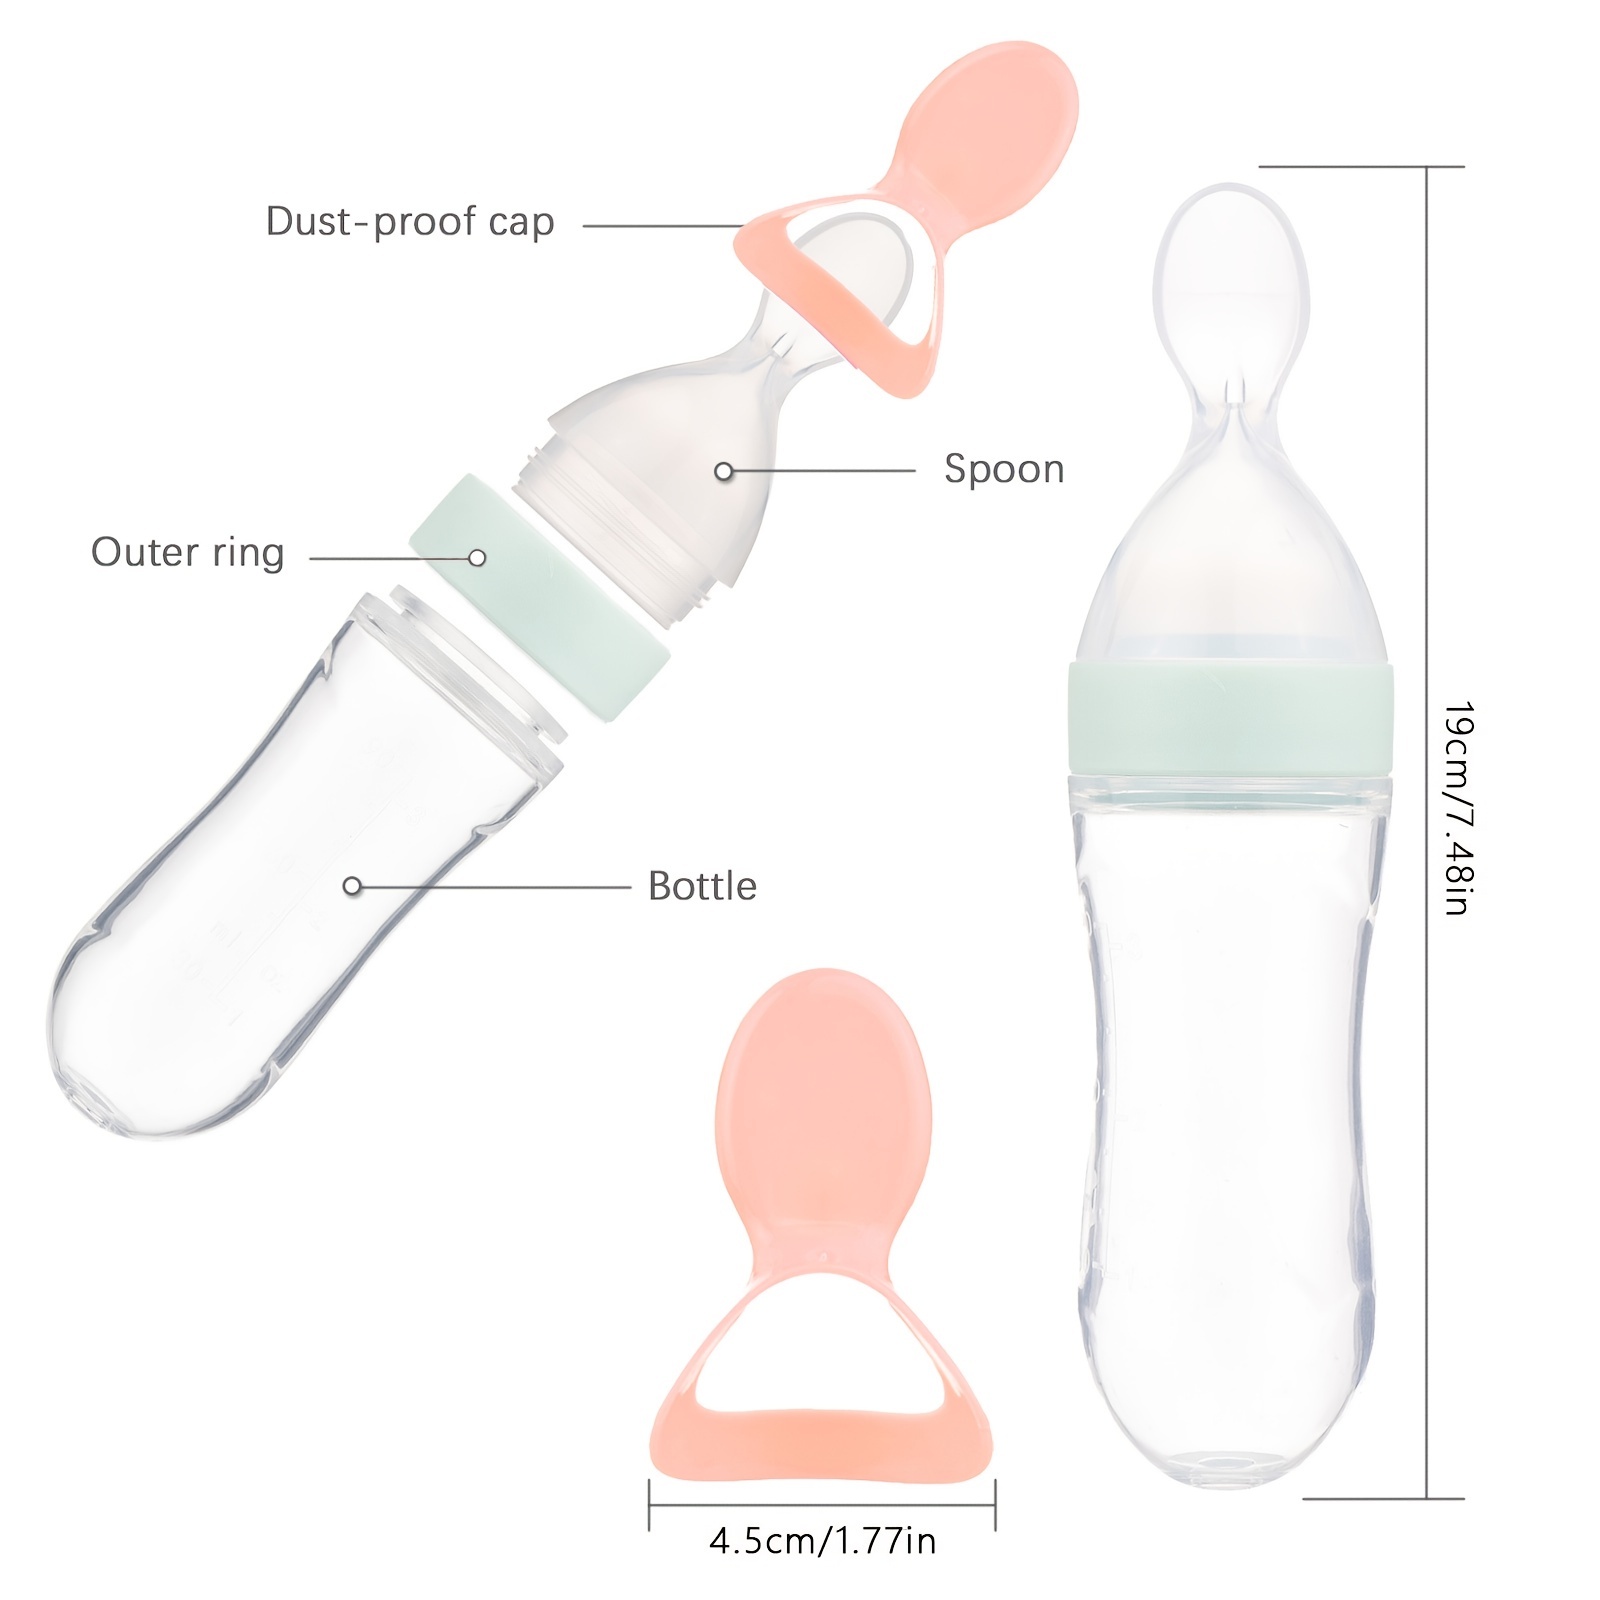 AMERTEER Silicone Baby Food Dispensing Spoon - Squeeze Feeder with Spoon -  Spoon Bottle for Baby - Baby Spoon Feeder Bottle Baby Solid Food Feeder